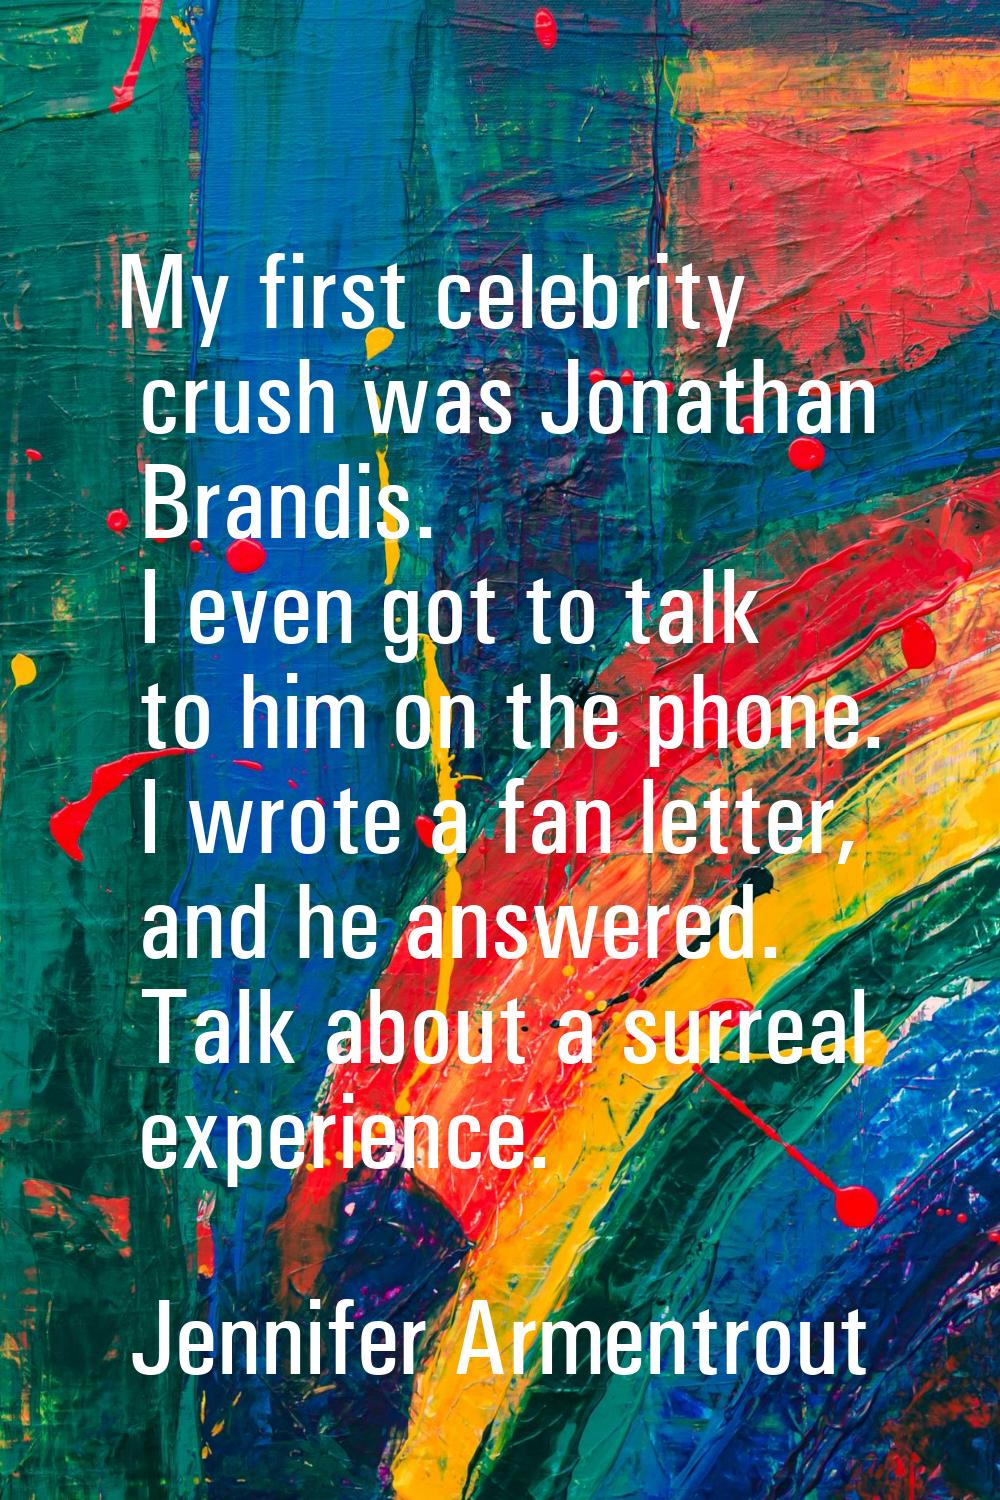 My first celebrity crush was Jonathan Brandis. I even got to talk to him on the phone. I wrote a fa